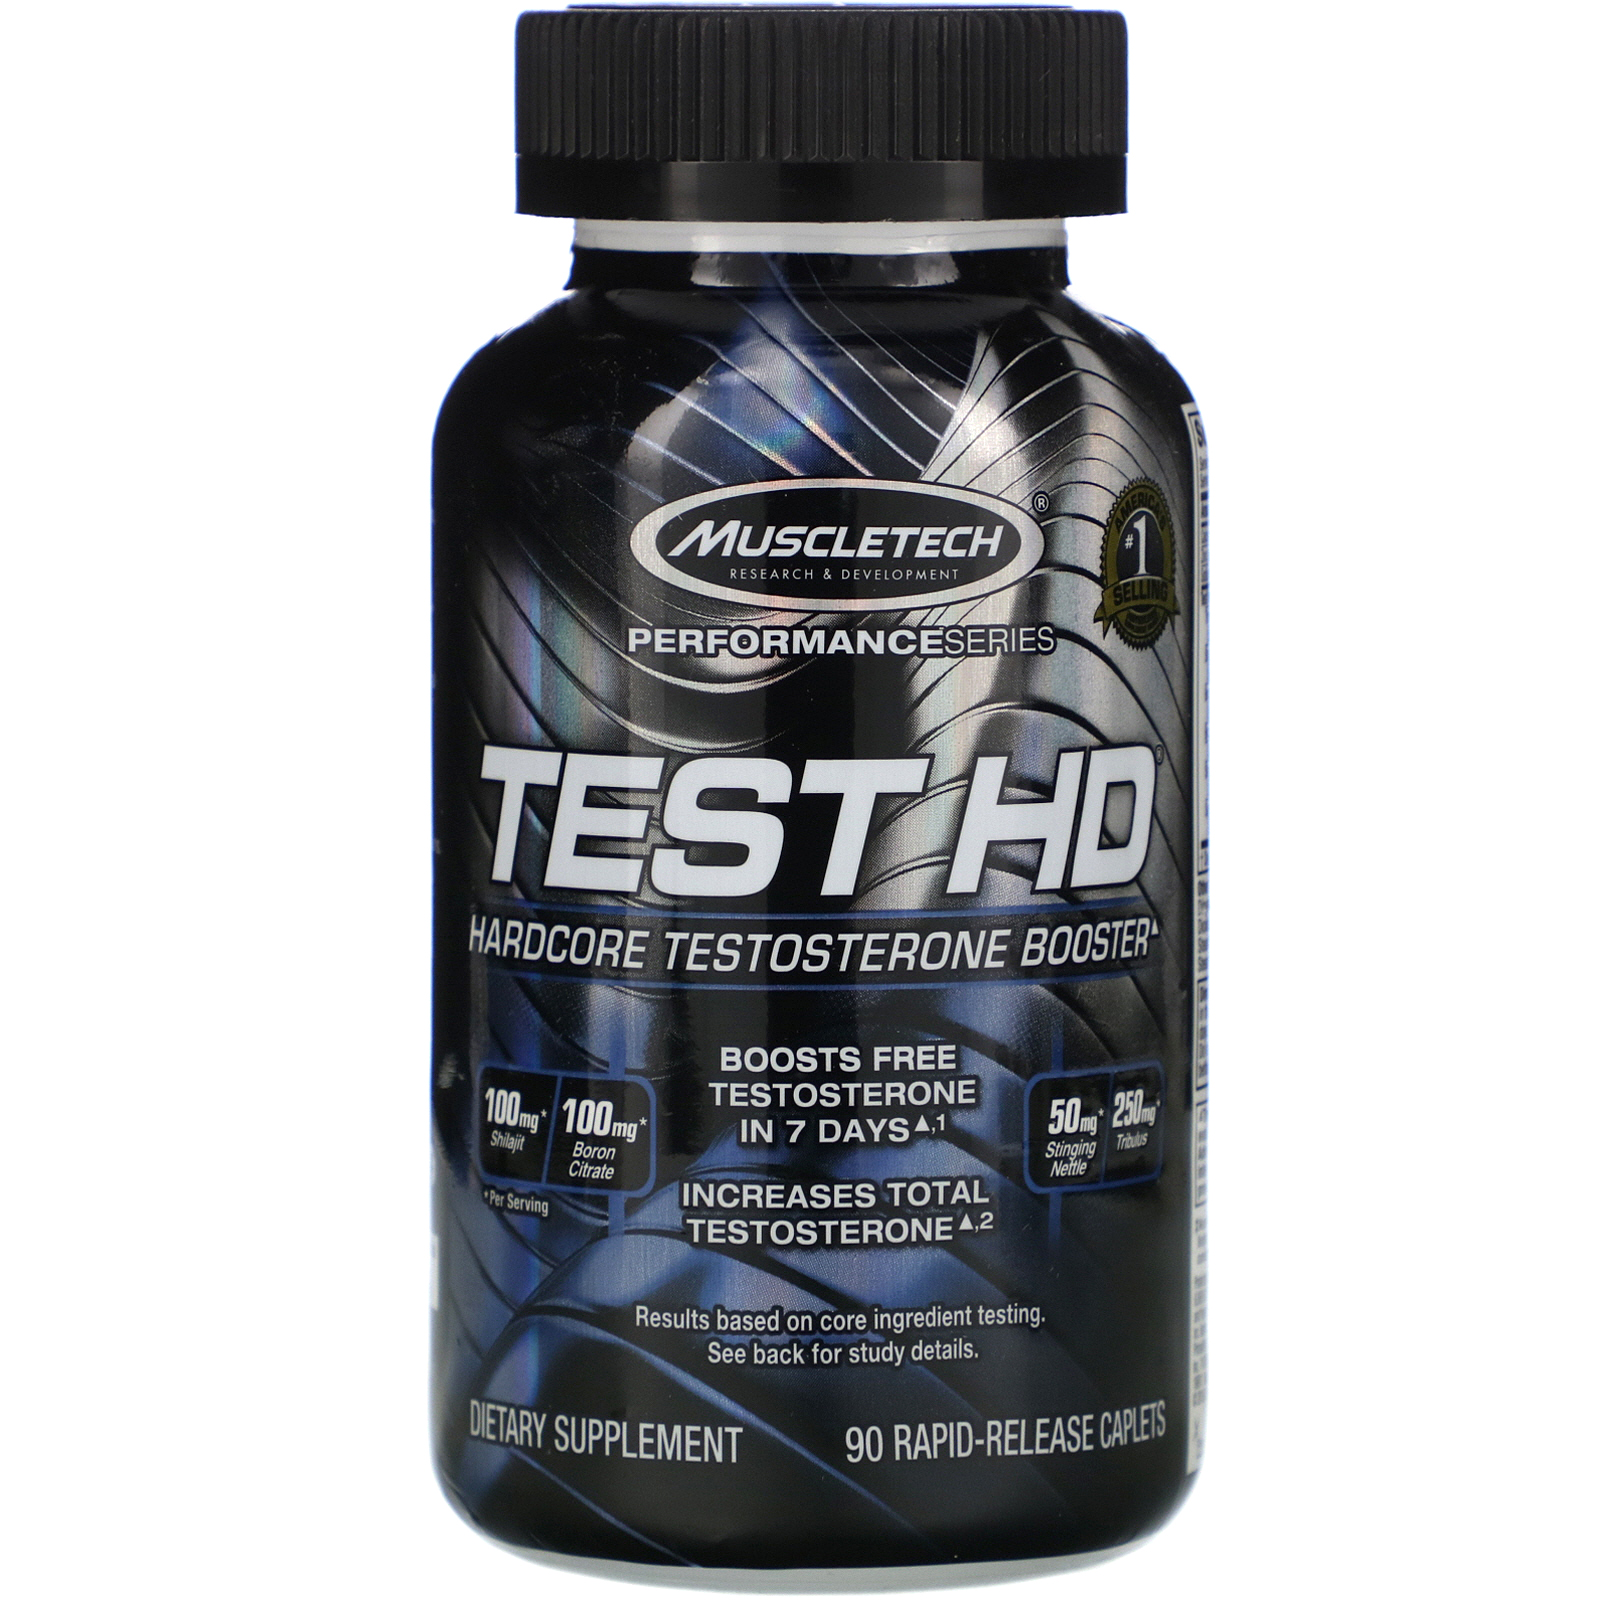 The testosterone booster is the best alternative post thumbnail image